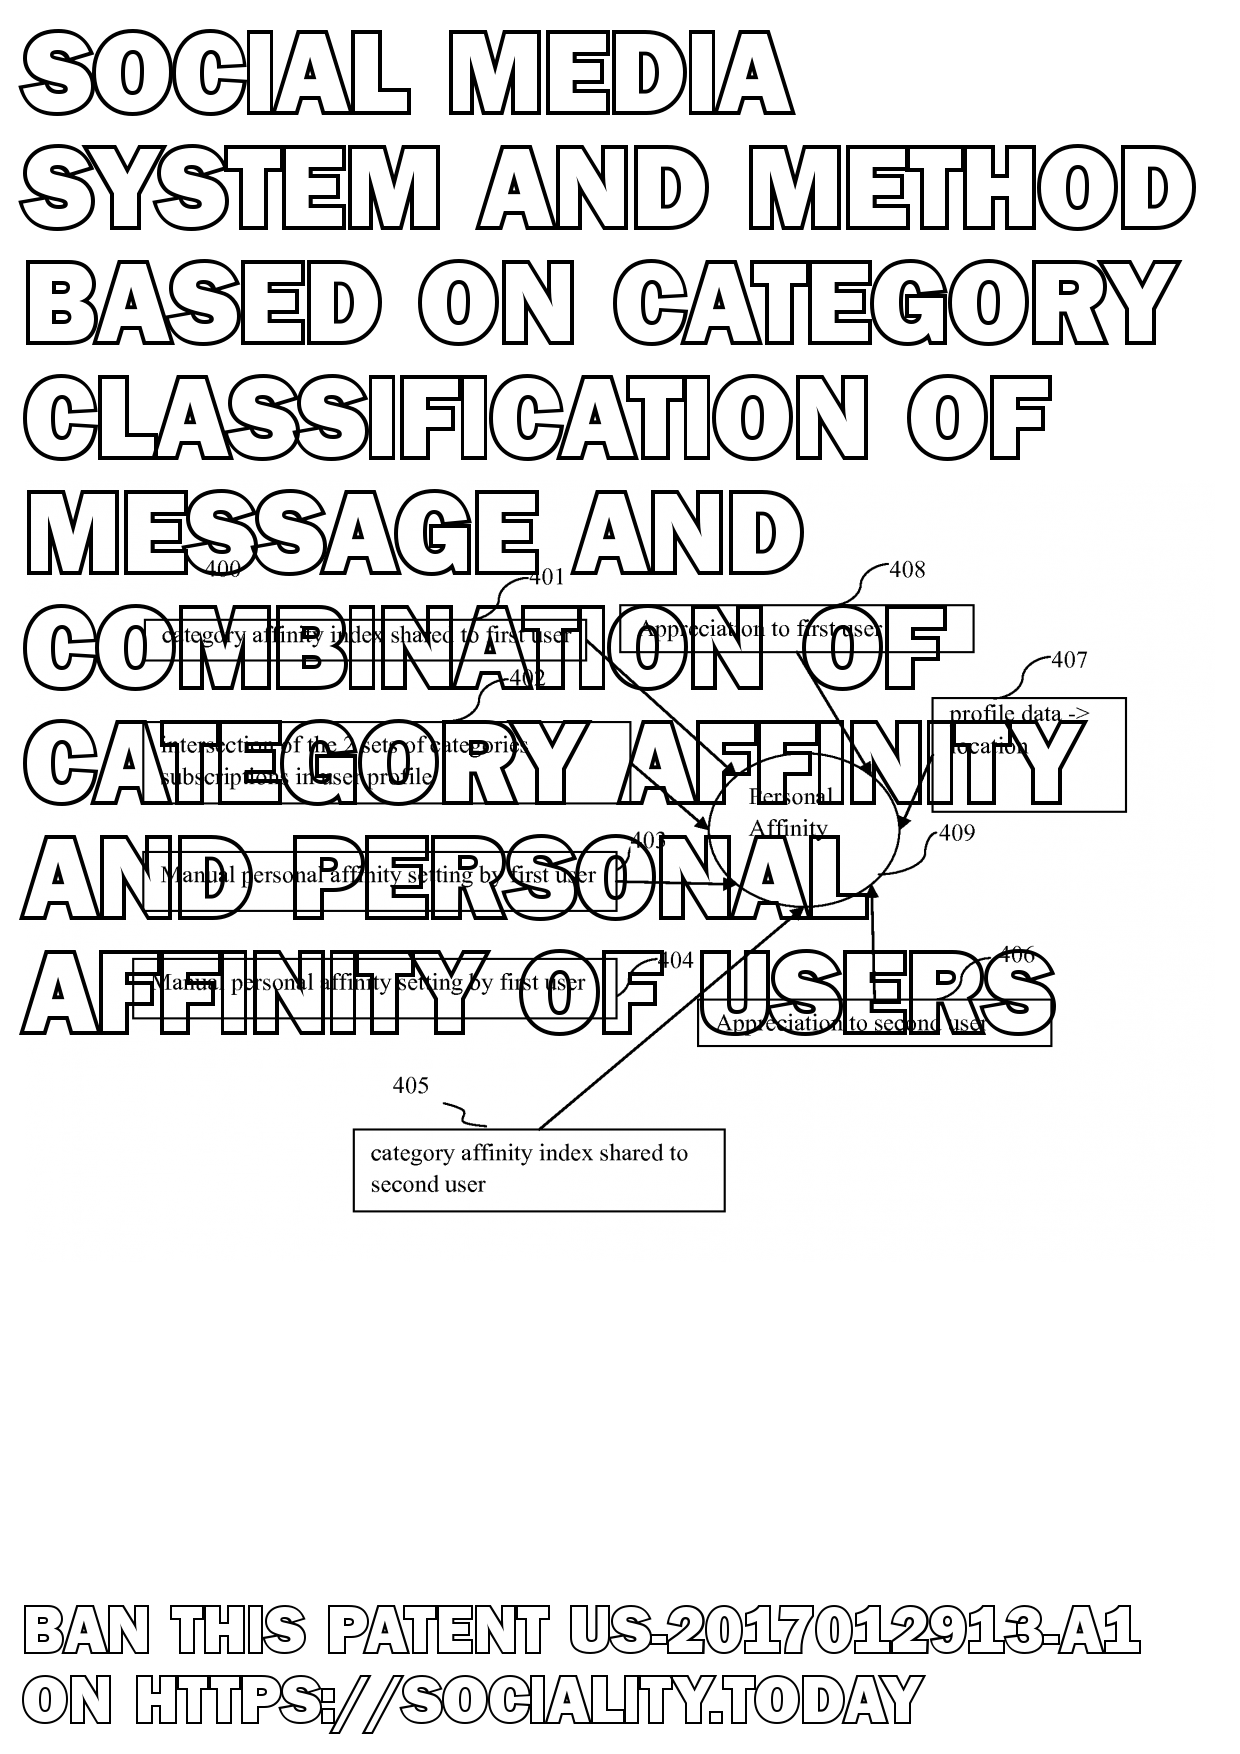 Social media system and method based on category classification of message and combination of category affinity and personal affinity of users  - US-2017012913-A1